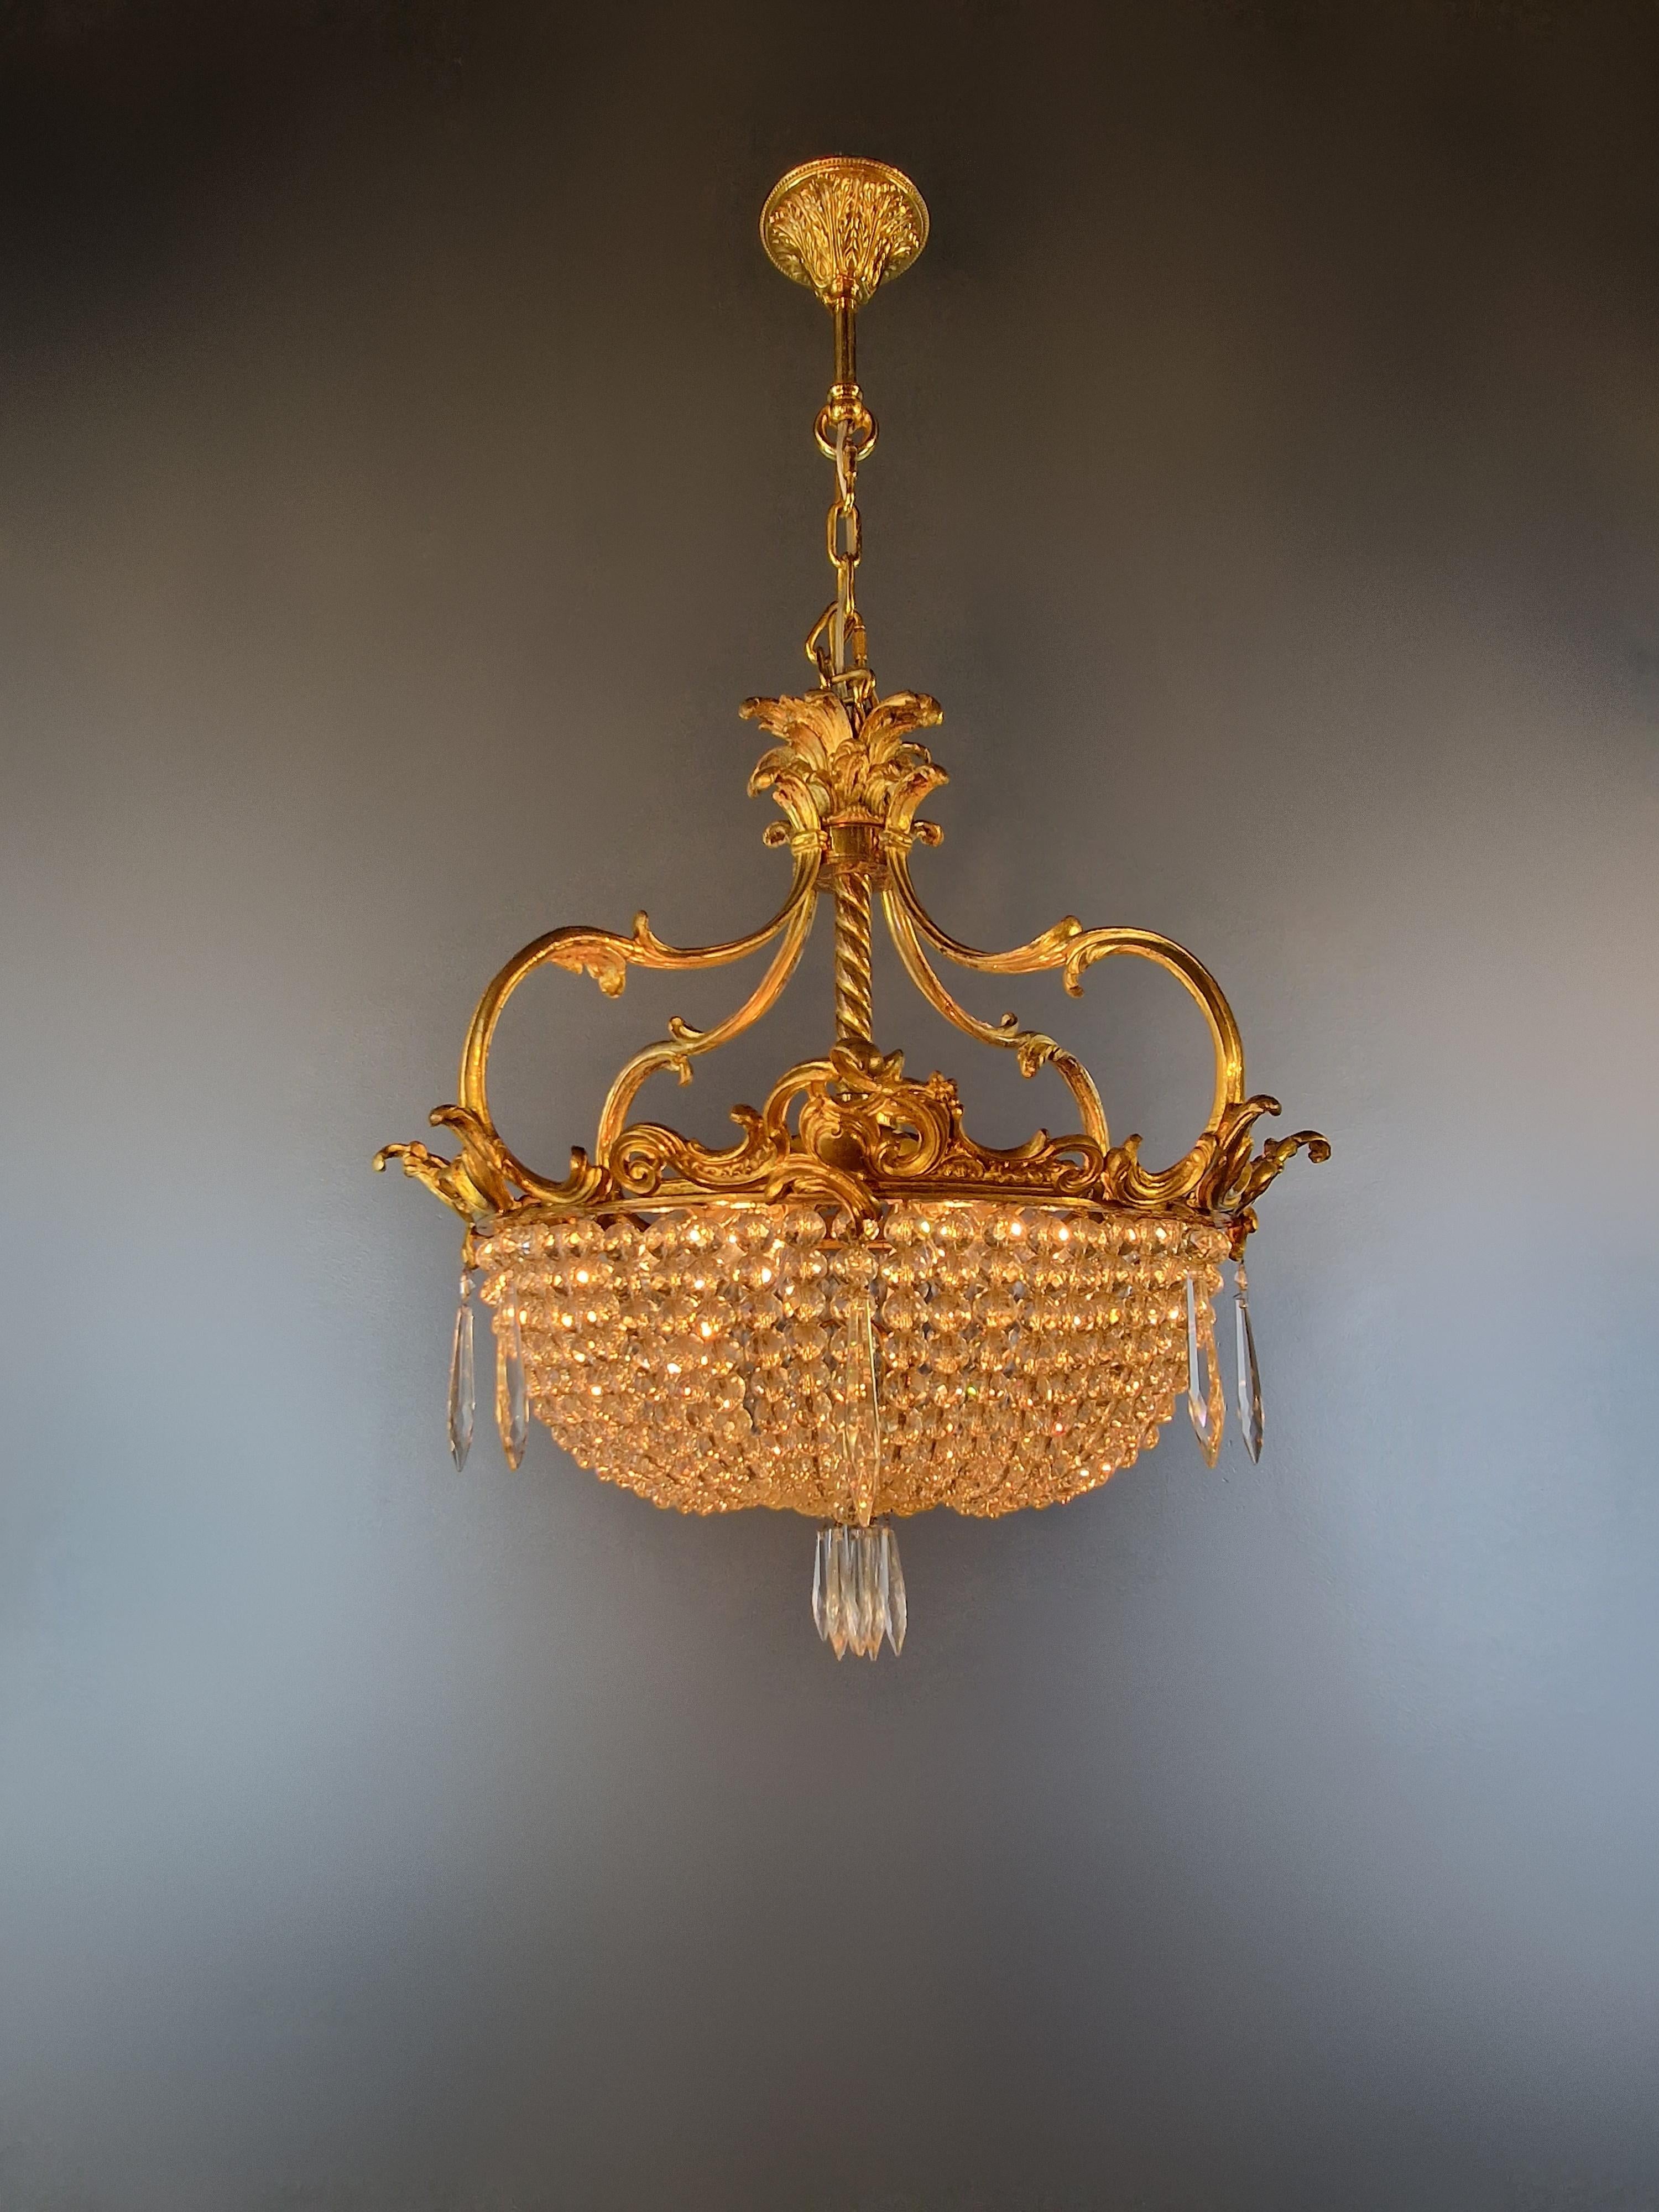 We present to you an exquisite Art Nouveau brass chandelier chandelier ceiling light - a real rarity and an antique jewel. This vintage chandelier was lovingly and professionally restored in Berlin and its electrical wiring was adapted for smooth